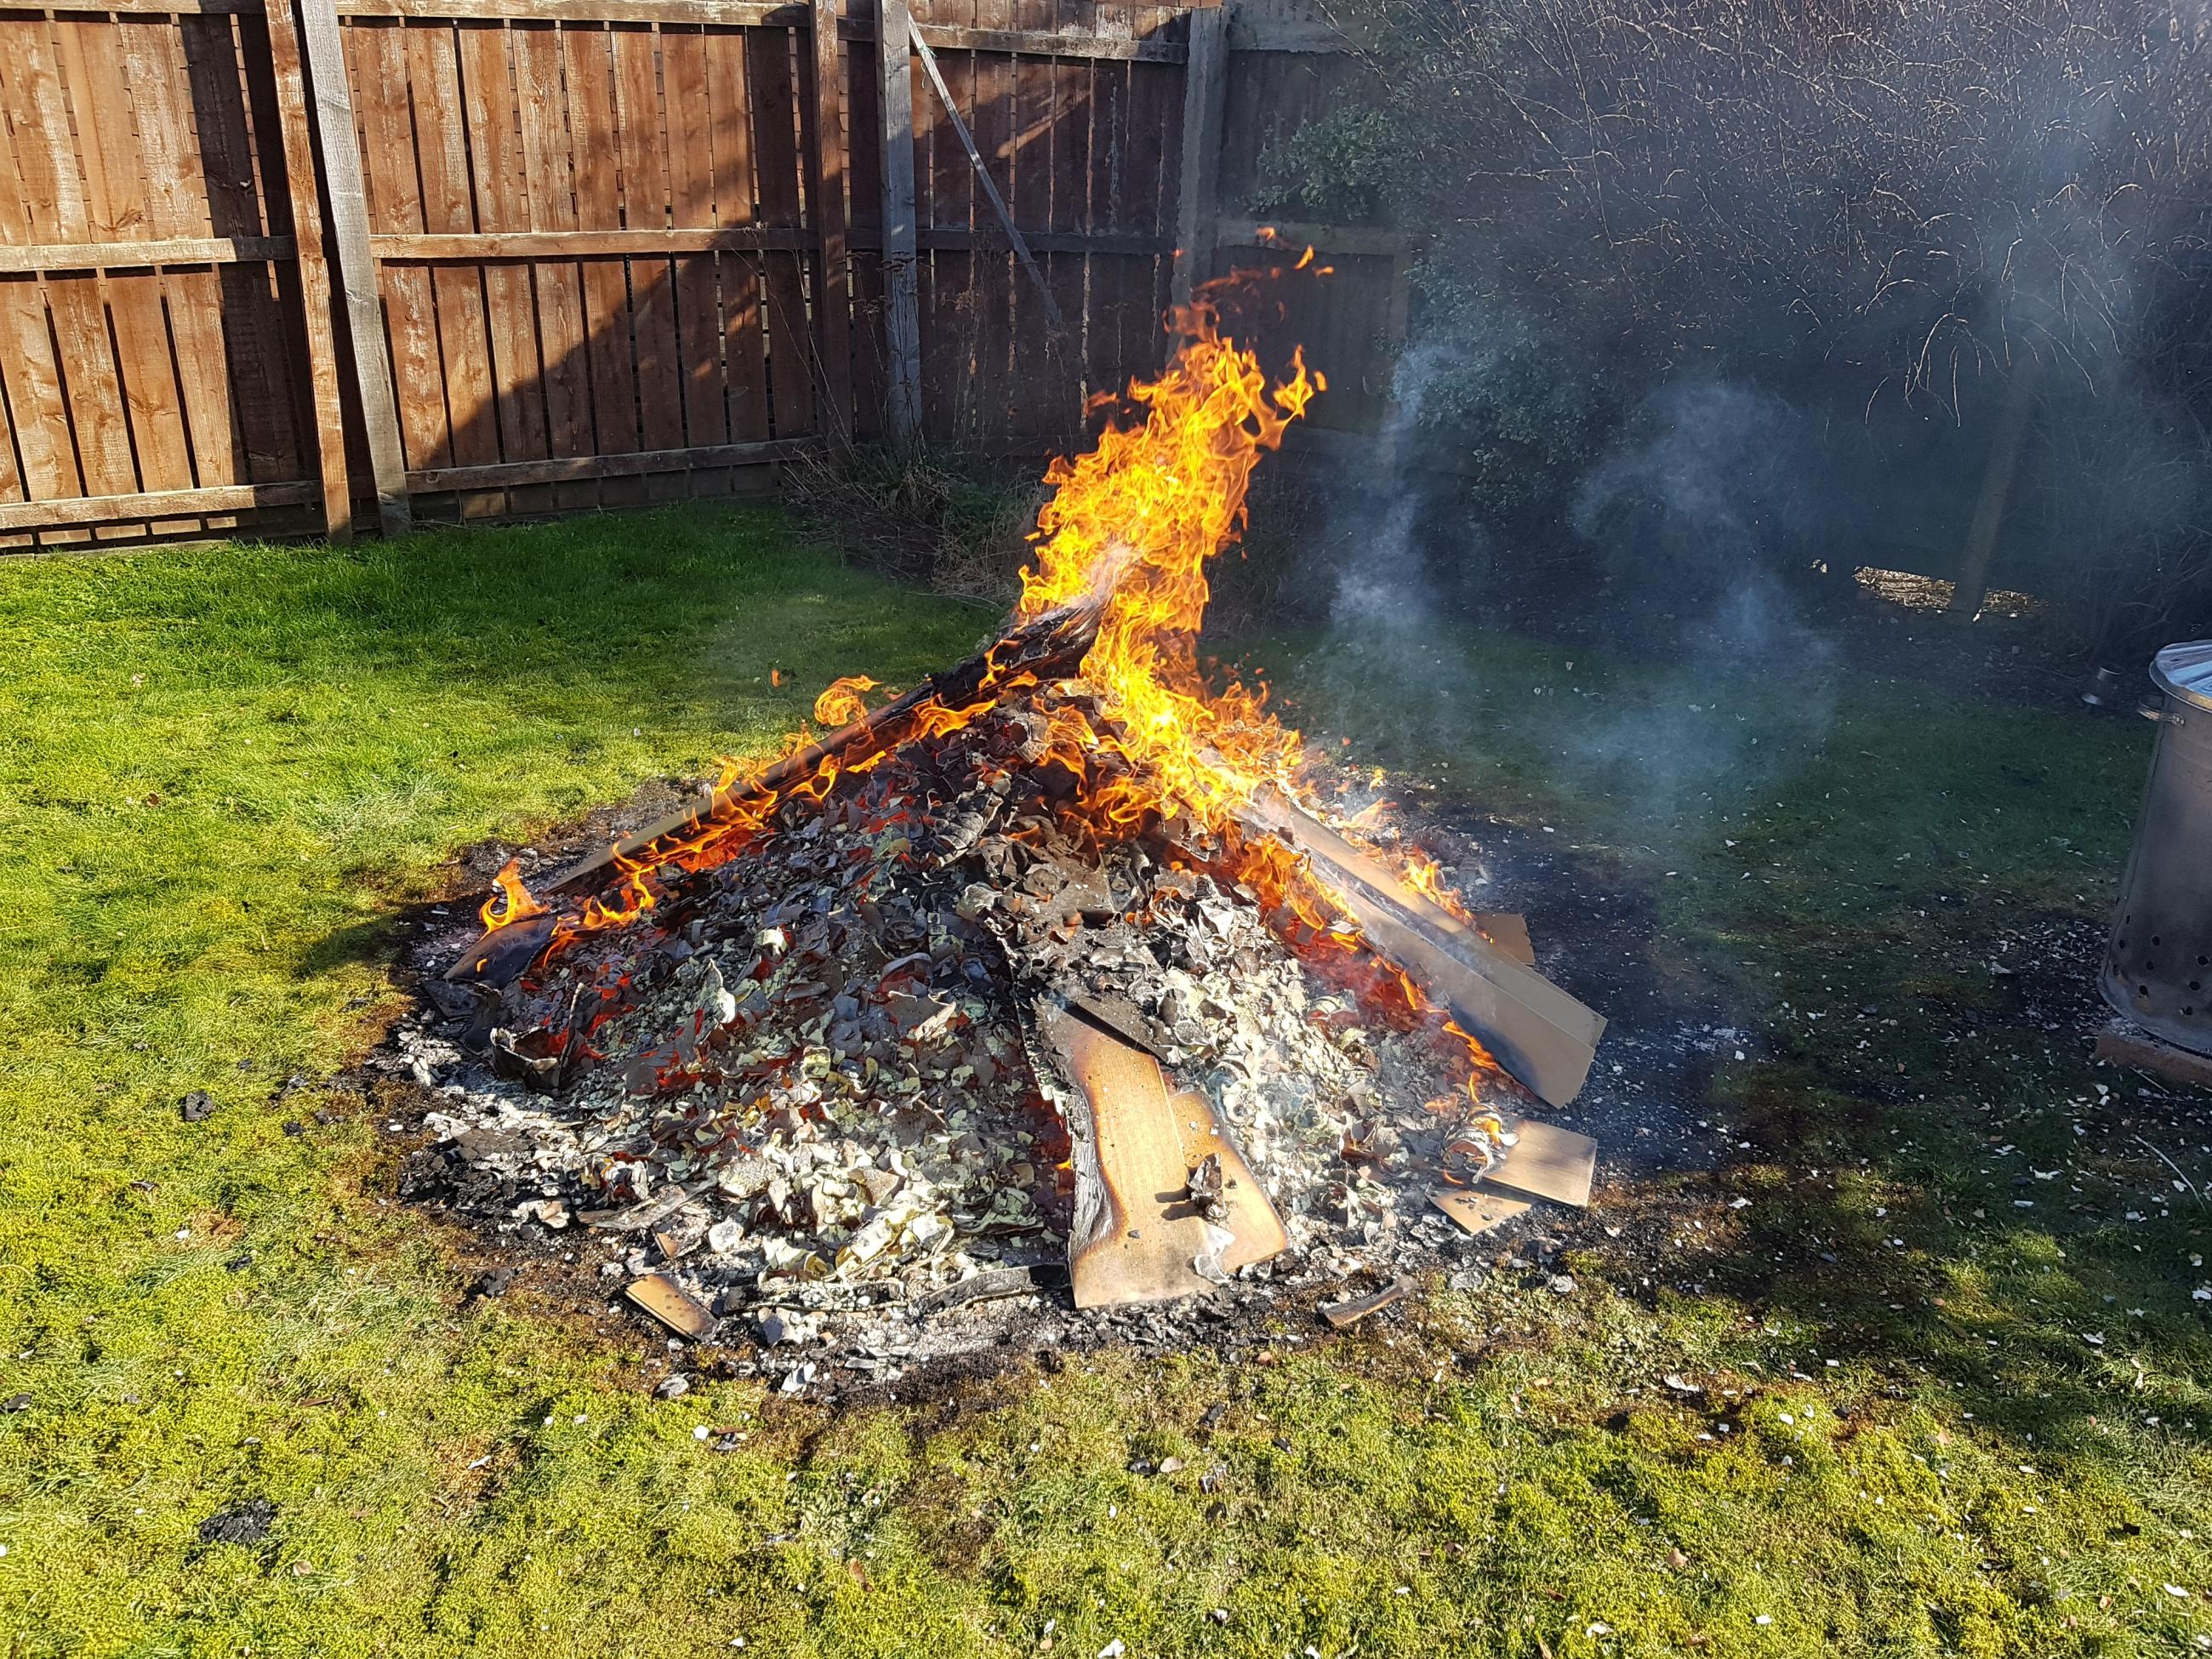 It was feared the bonfire could spread to nearby homes and gardens.